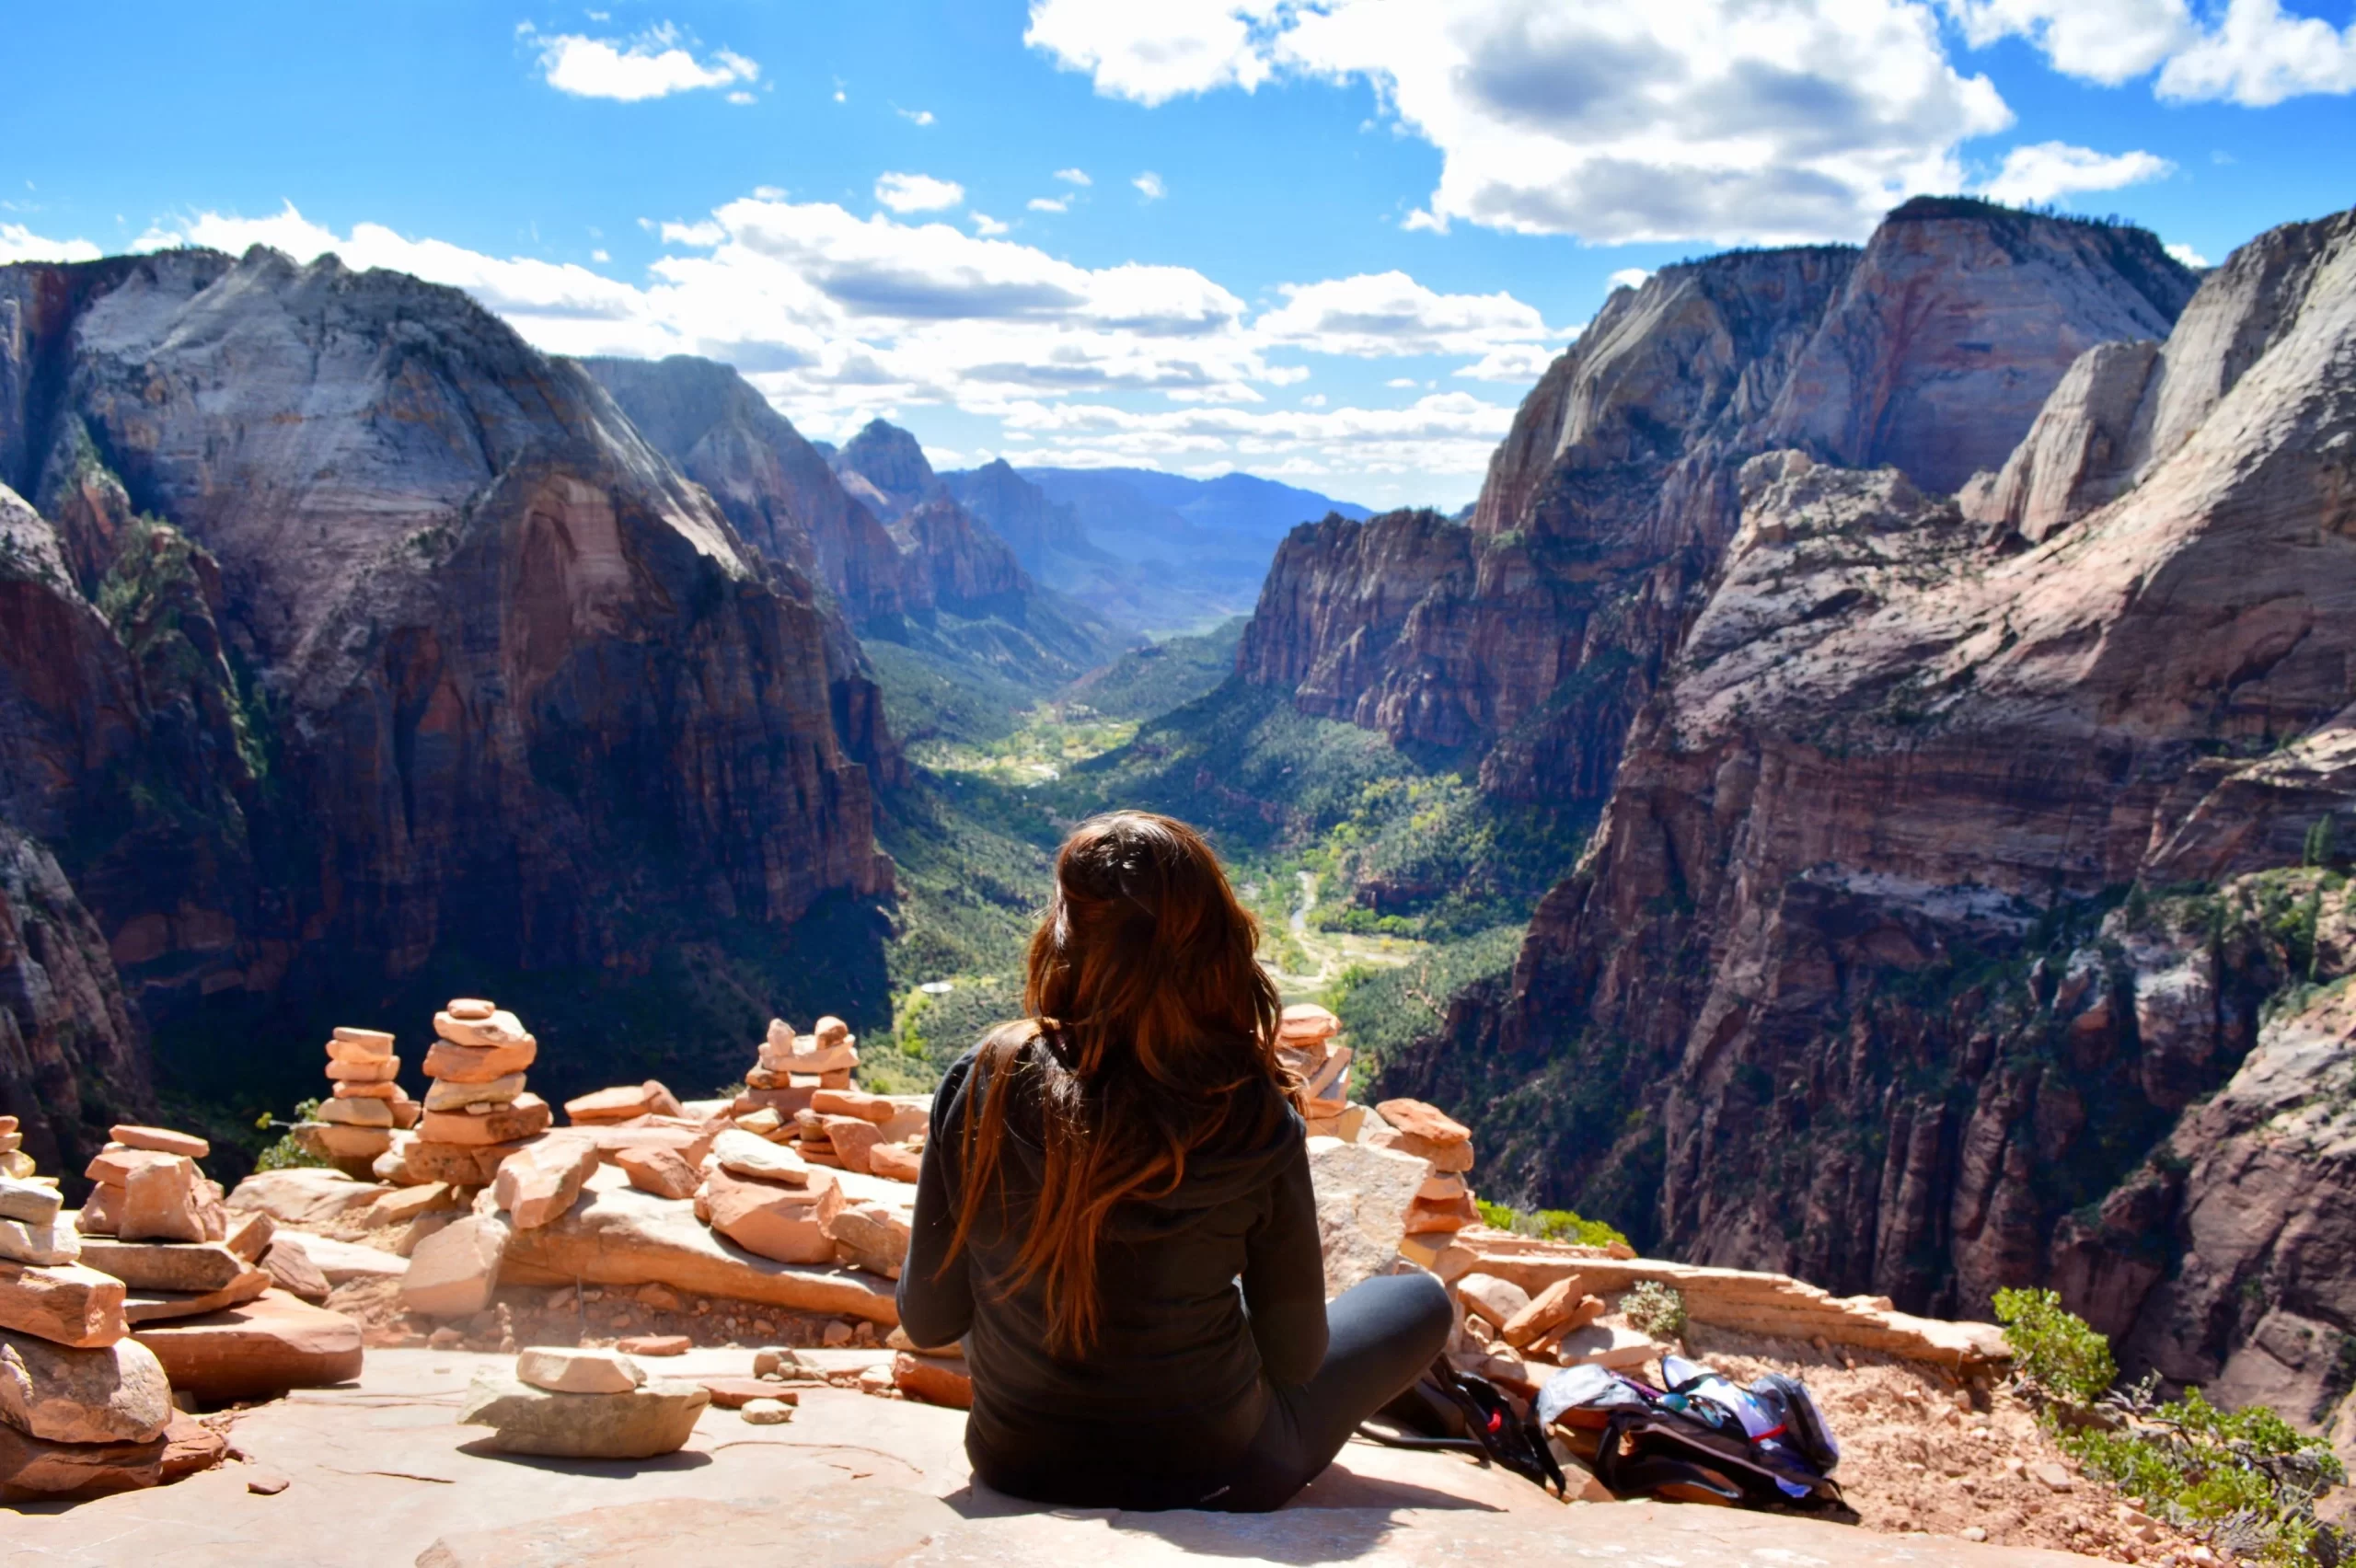 Zion National Park Captions and Quotes for Instagram